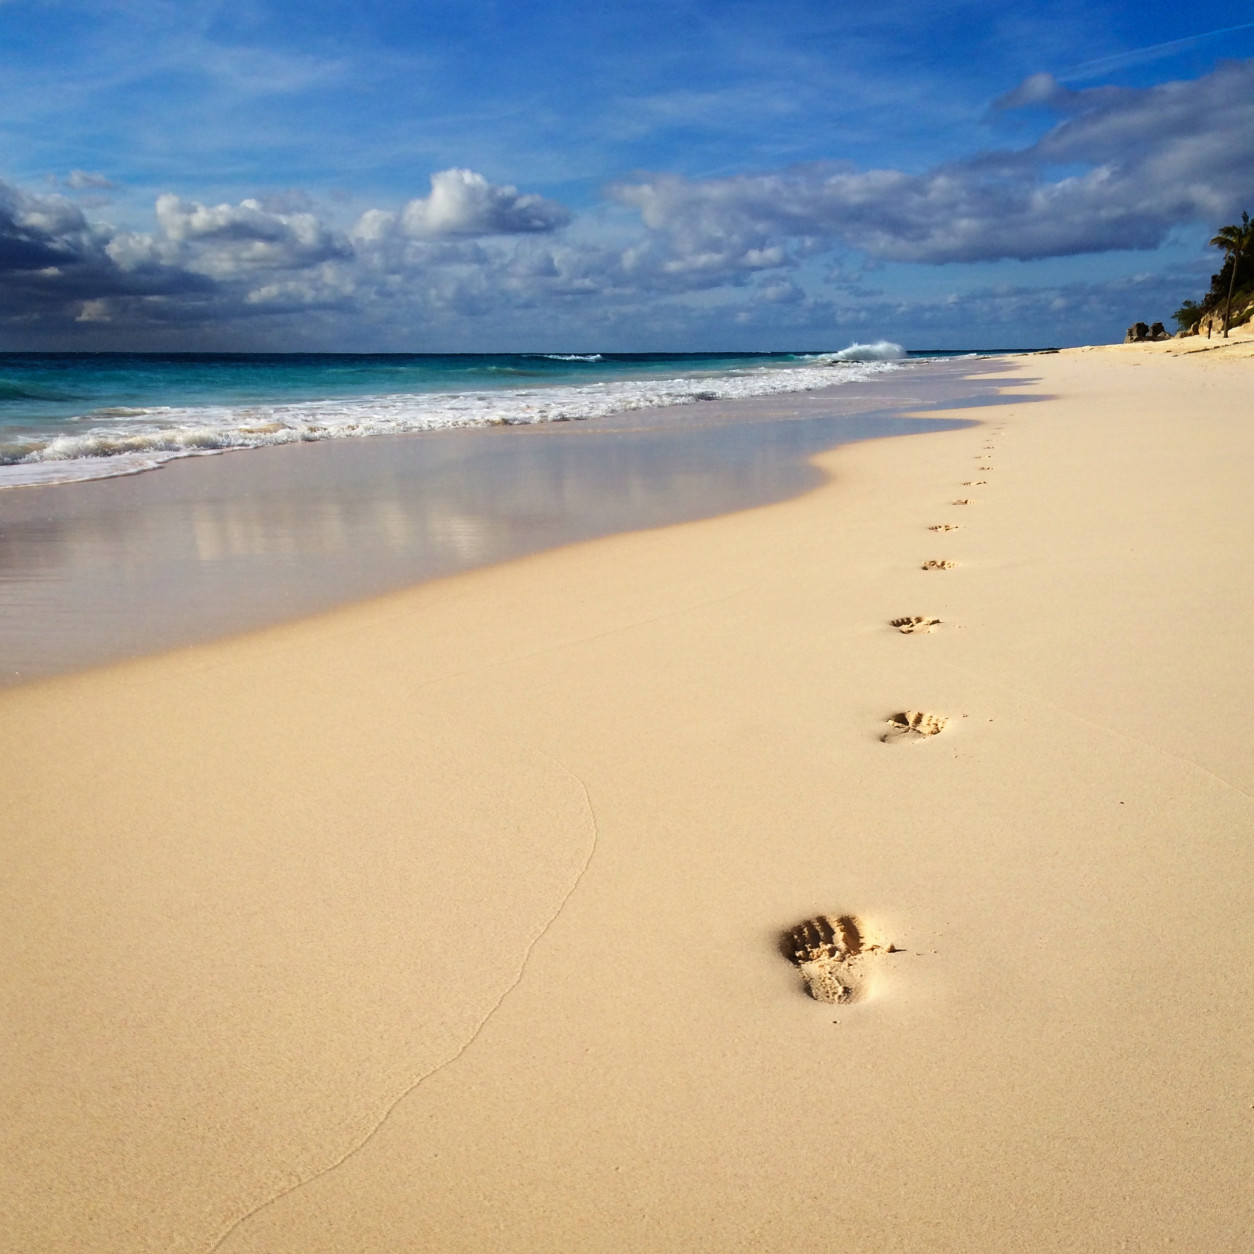 Footprints of a barefoot runner trail off into the distance on a beach coastline.